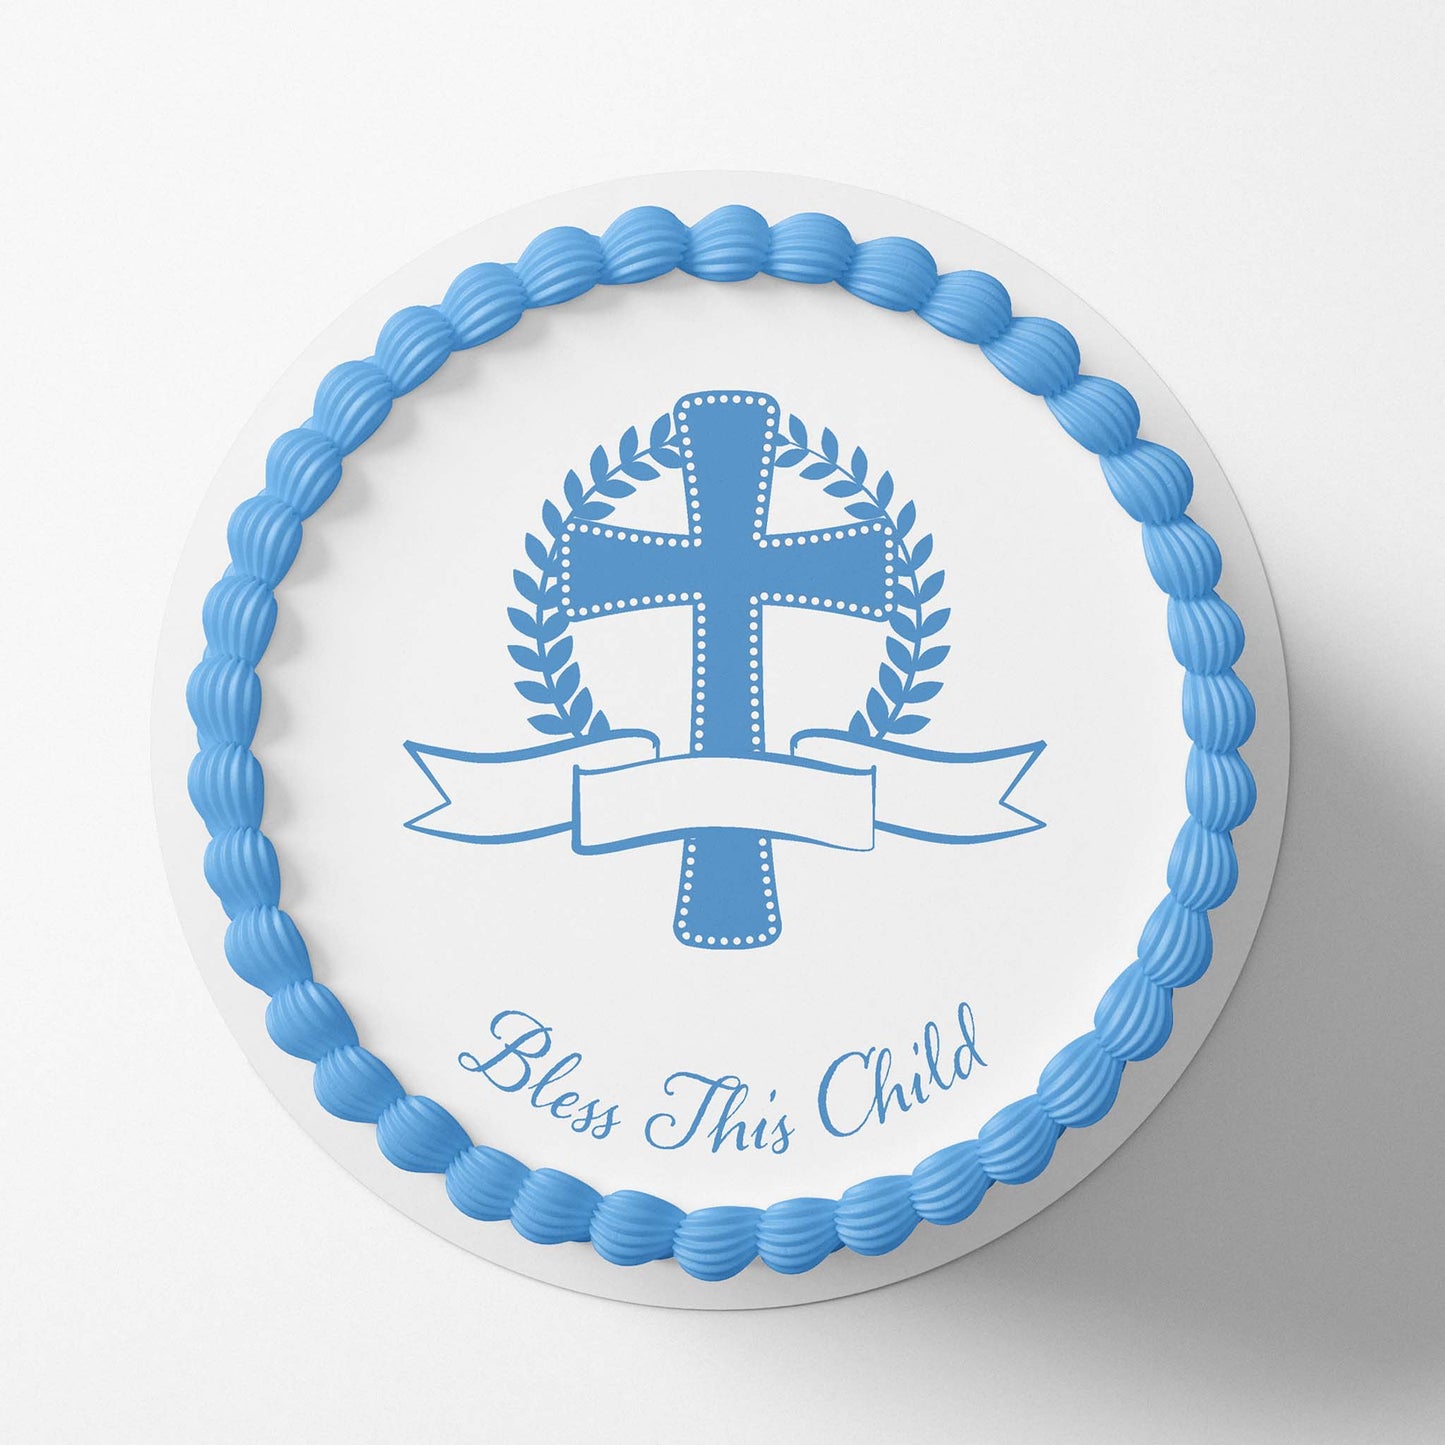 Bless This Child Blue - Edible Icing Image Edible Cake Topper, Edible Cake Image, ,printsoncakes